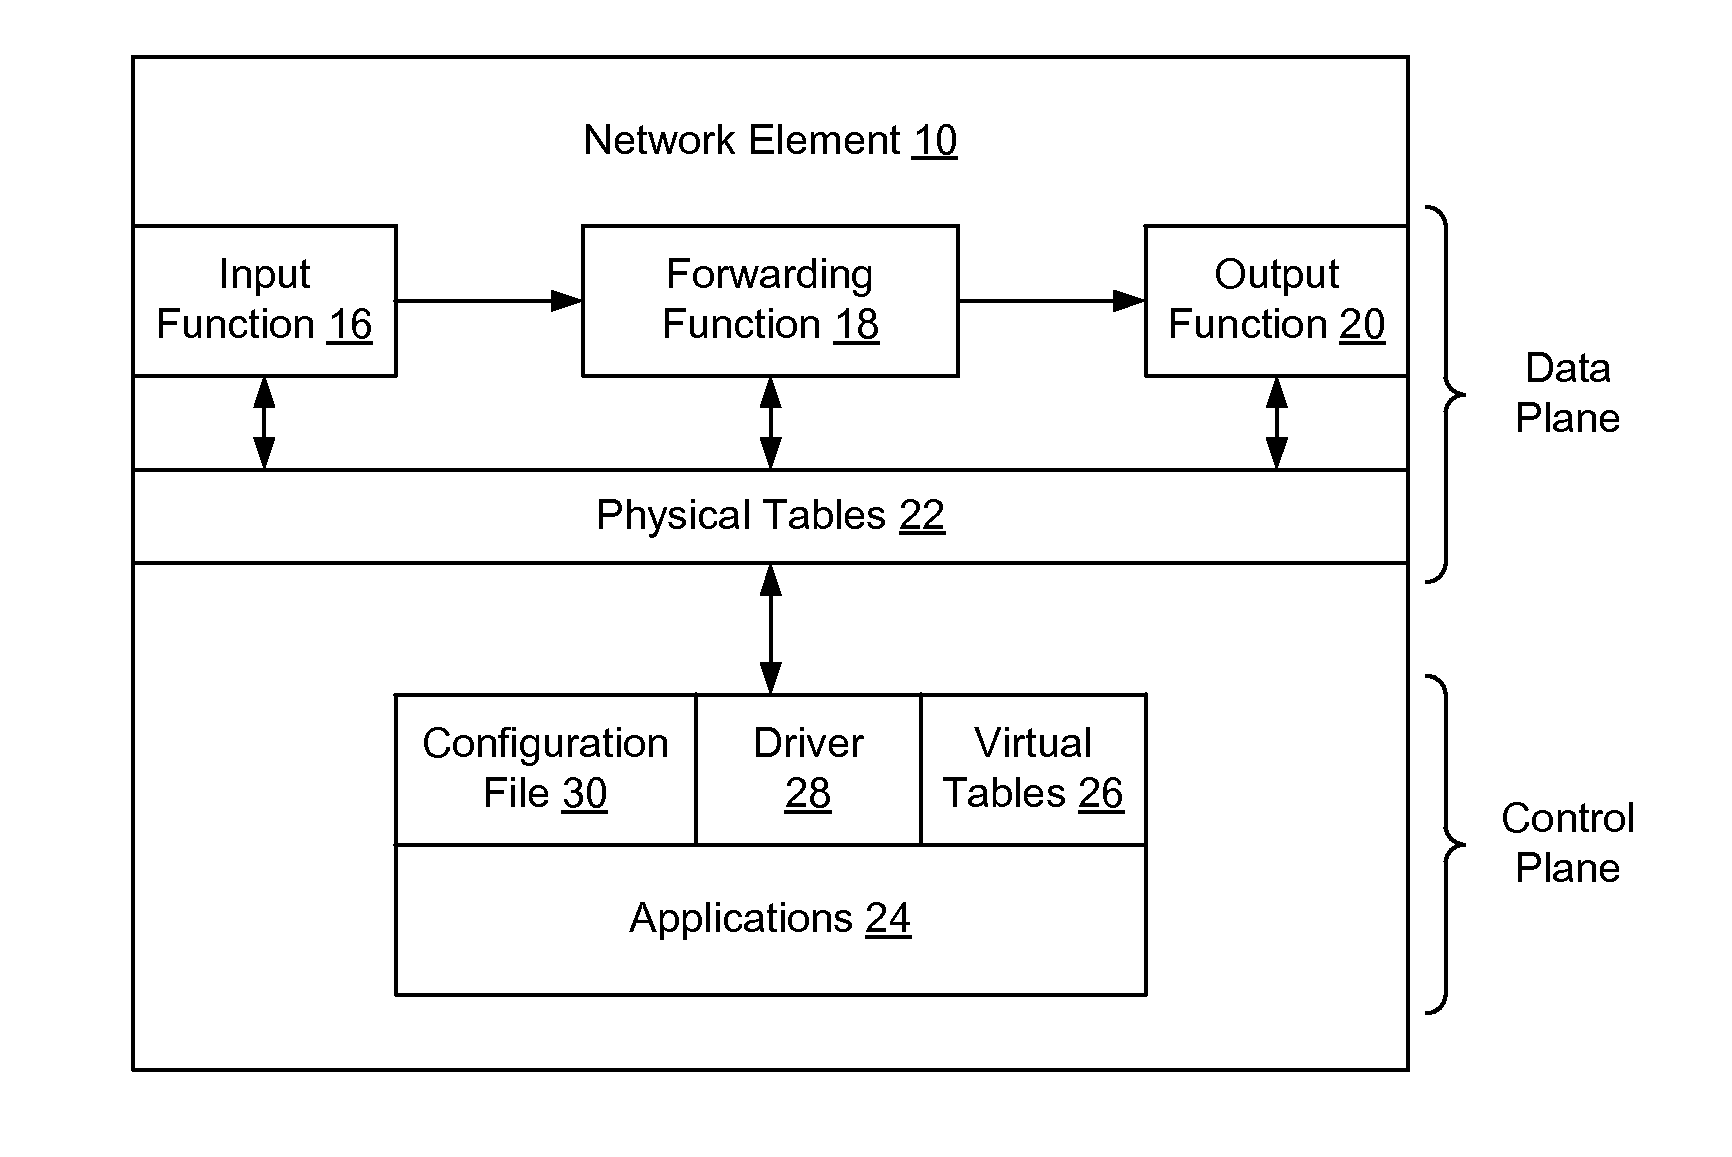 Self Adapting Driver for Controlling Datapath Hardware Elements